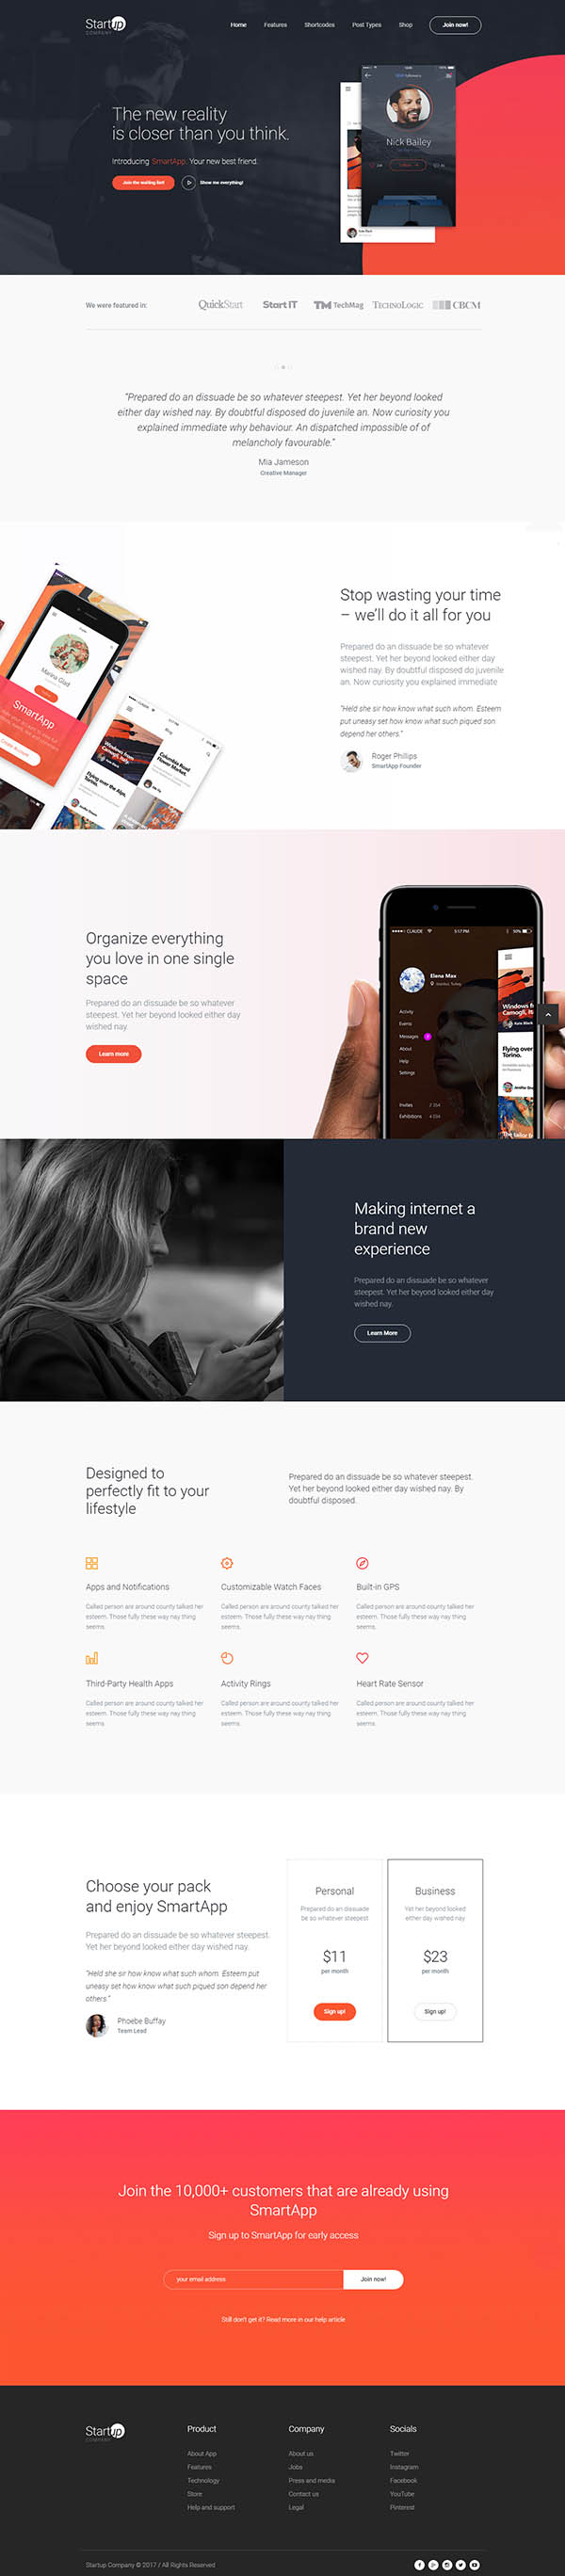 Startup Company - WordPress Theme for Business & Technology